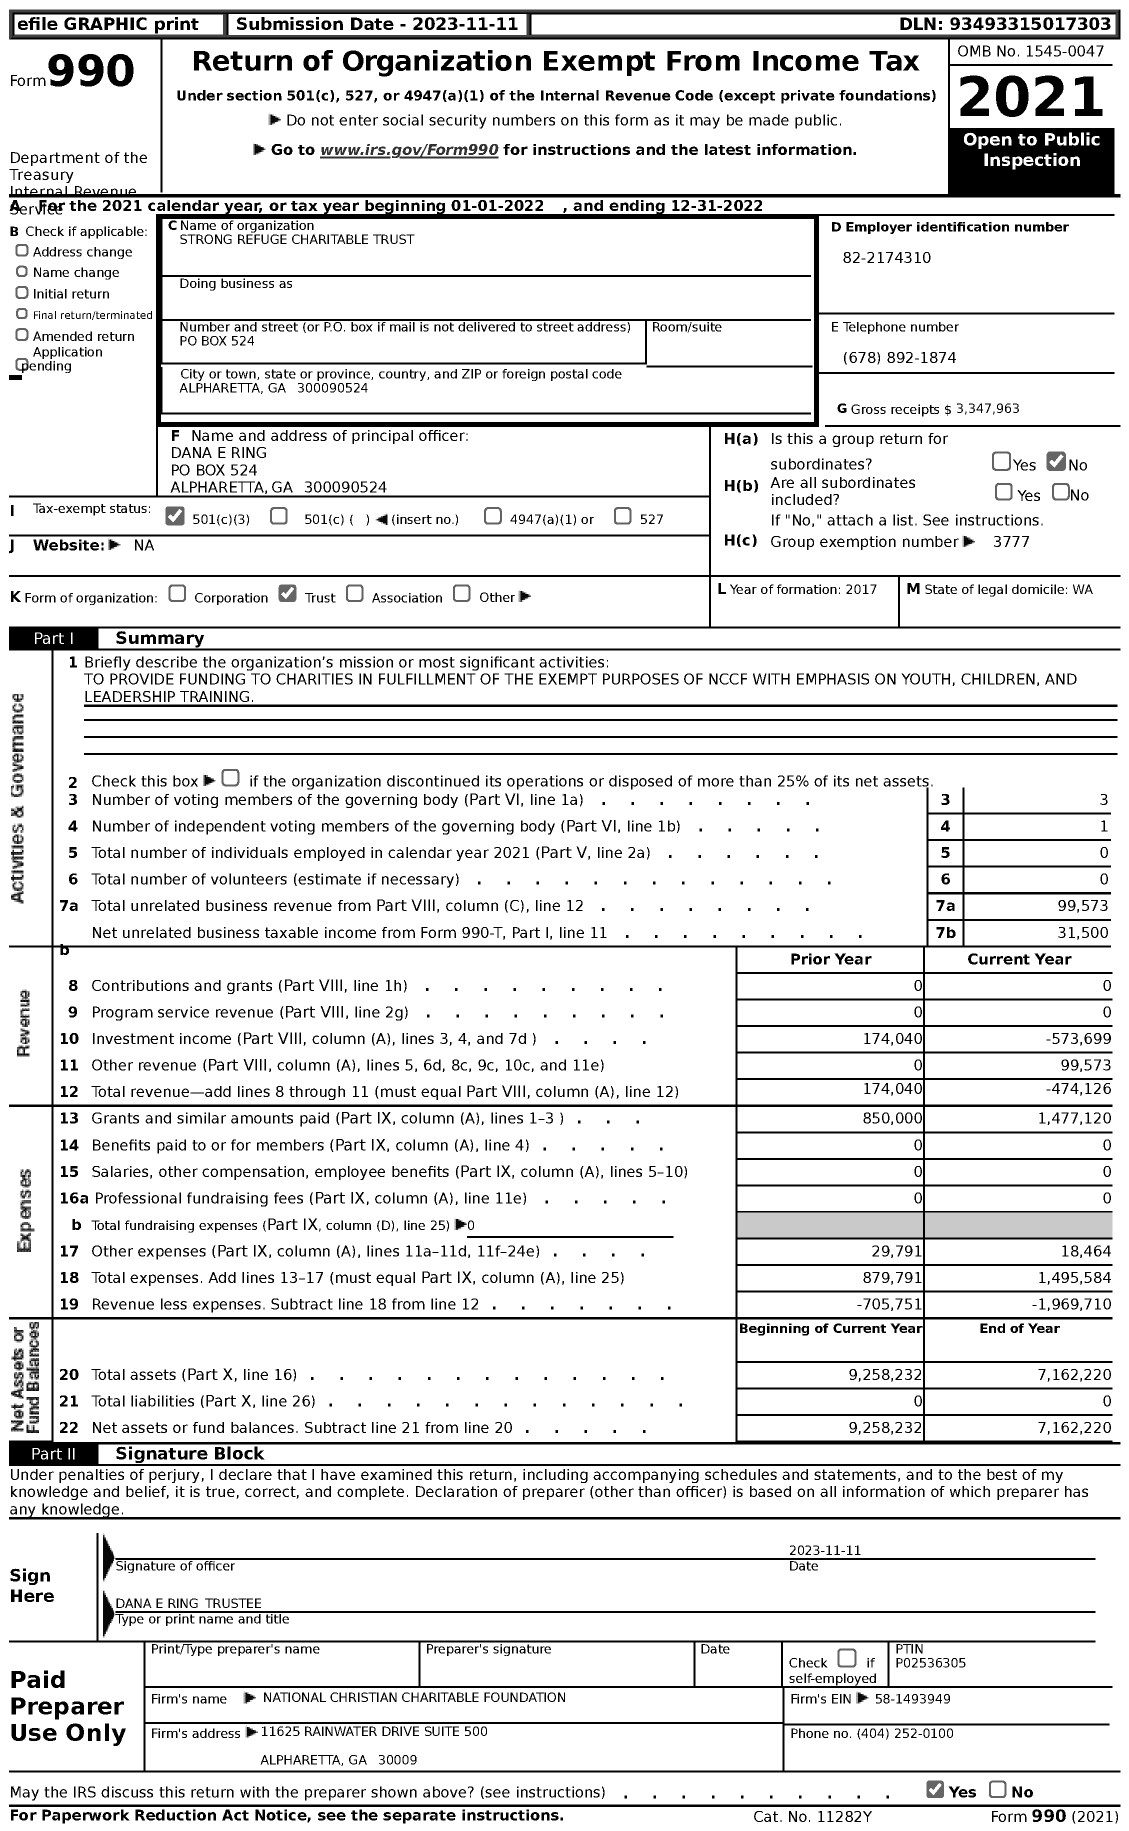 Image of first page of 2022 Form 990 for Strong Refuge Charitable Trust